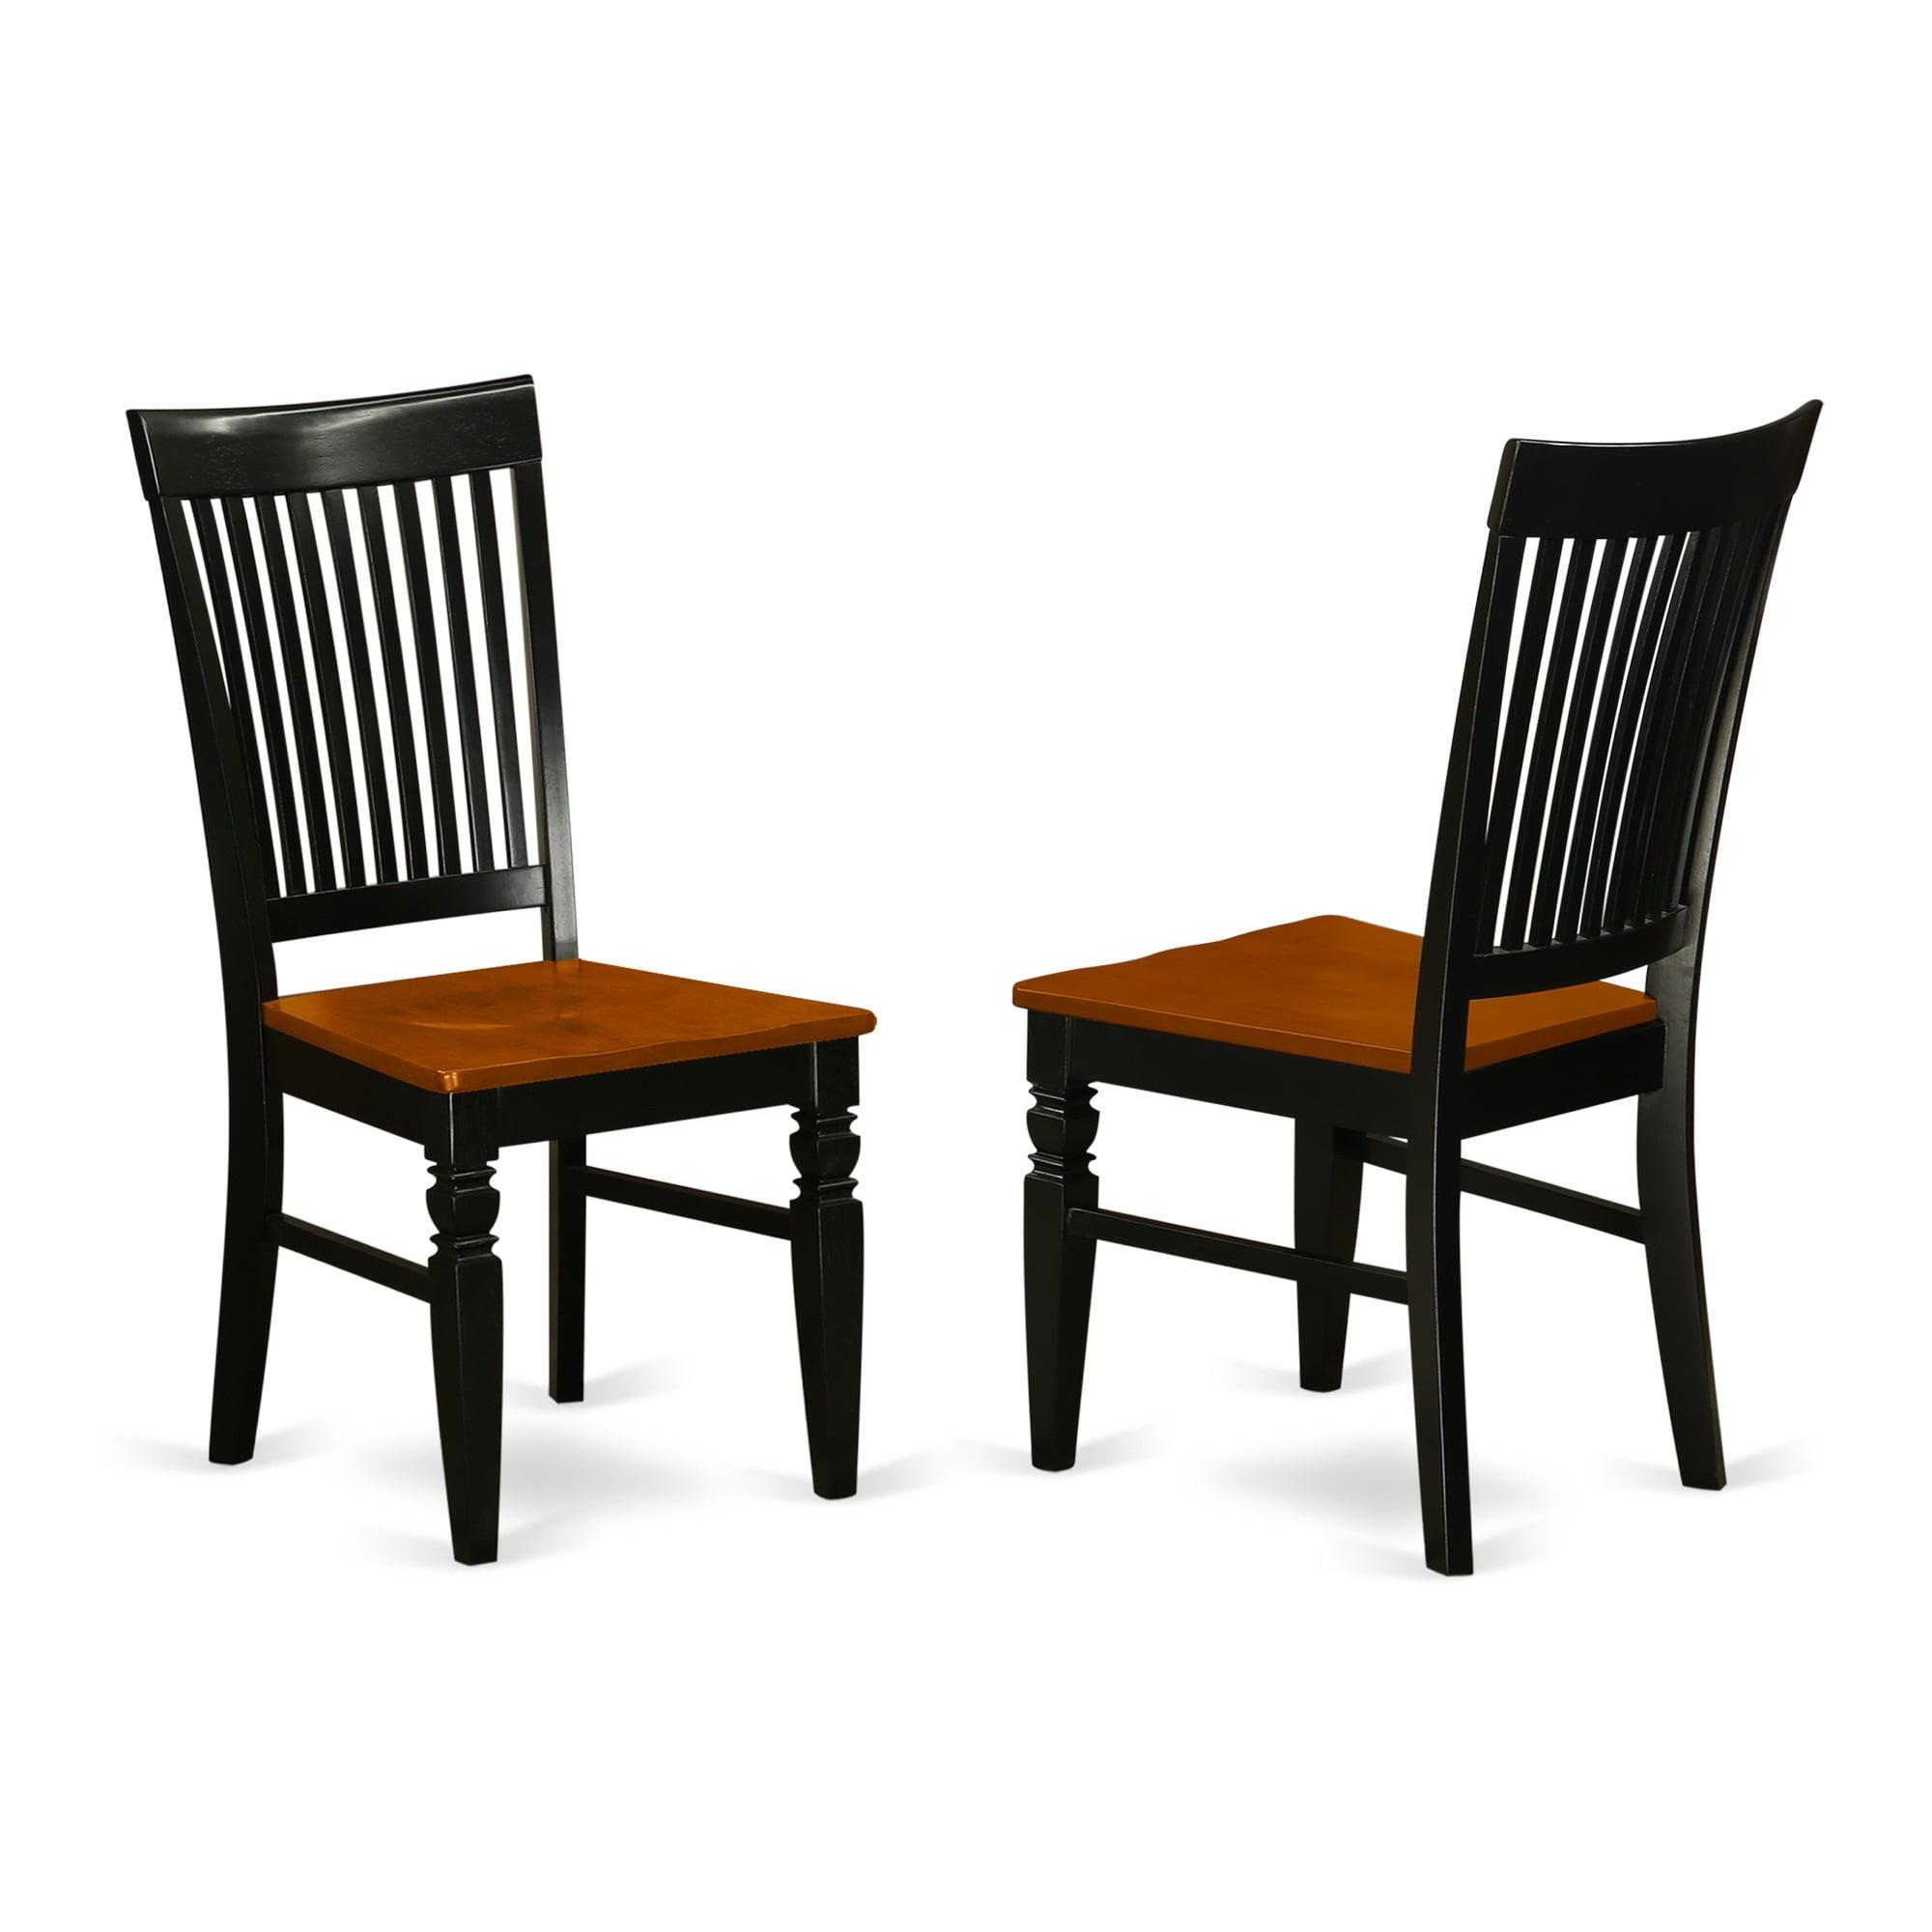 Black Cherry Solid Wood Slat Back Dining Chair Set of 2